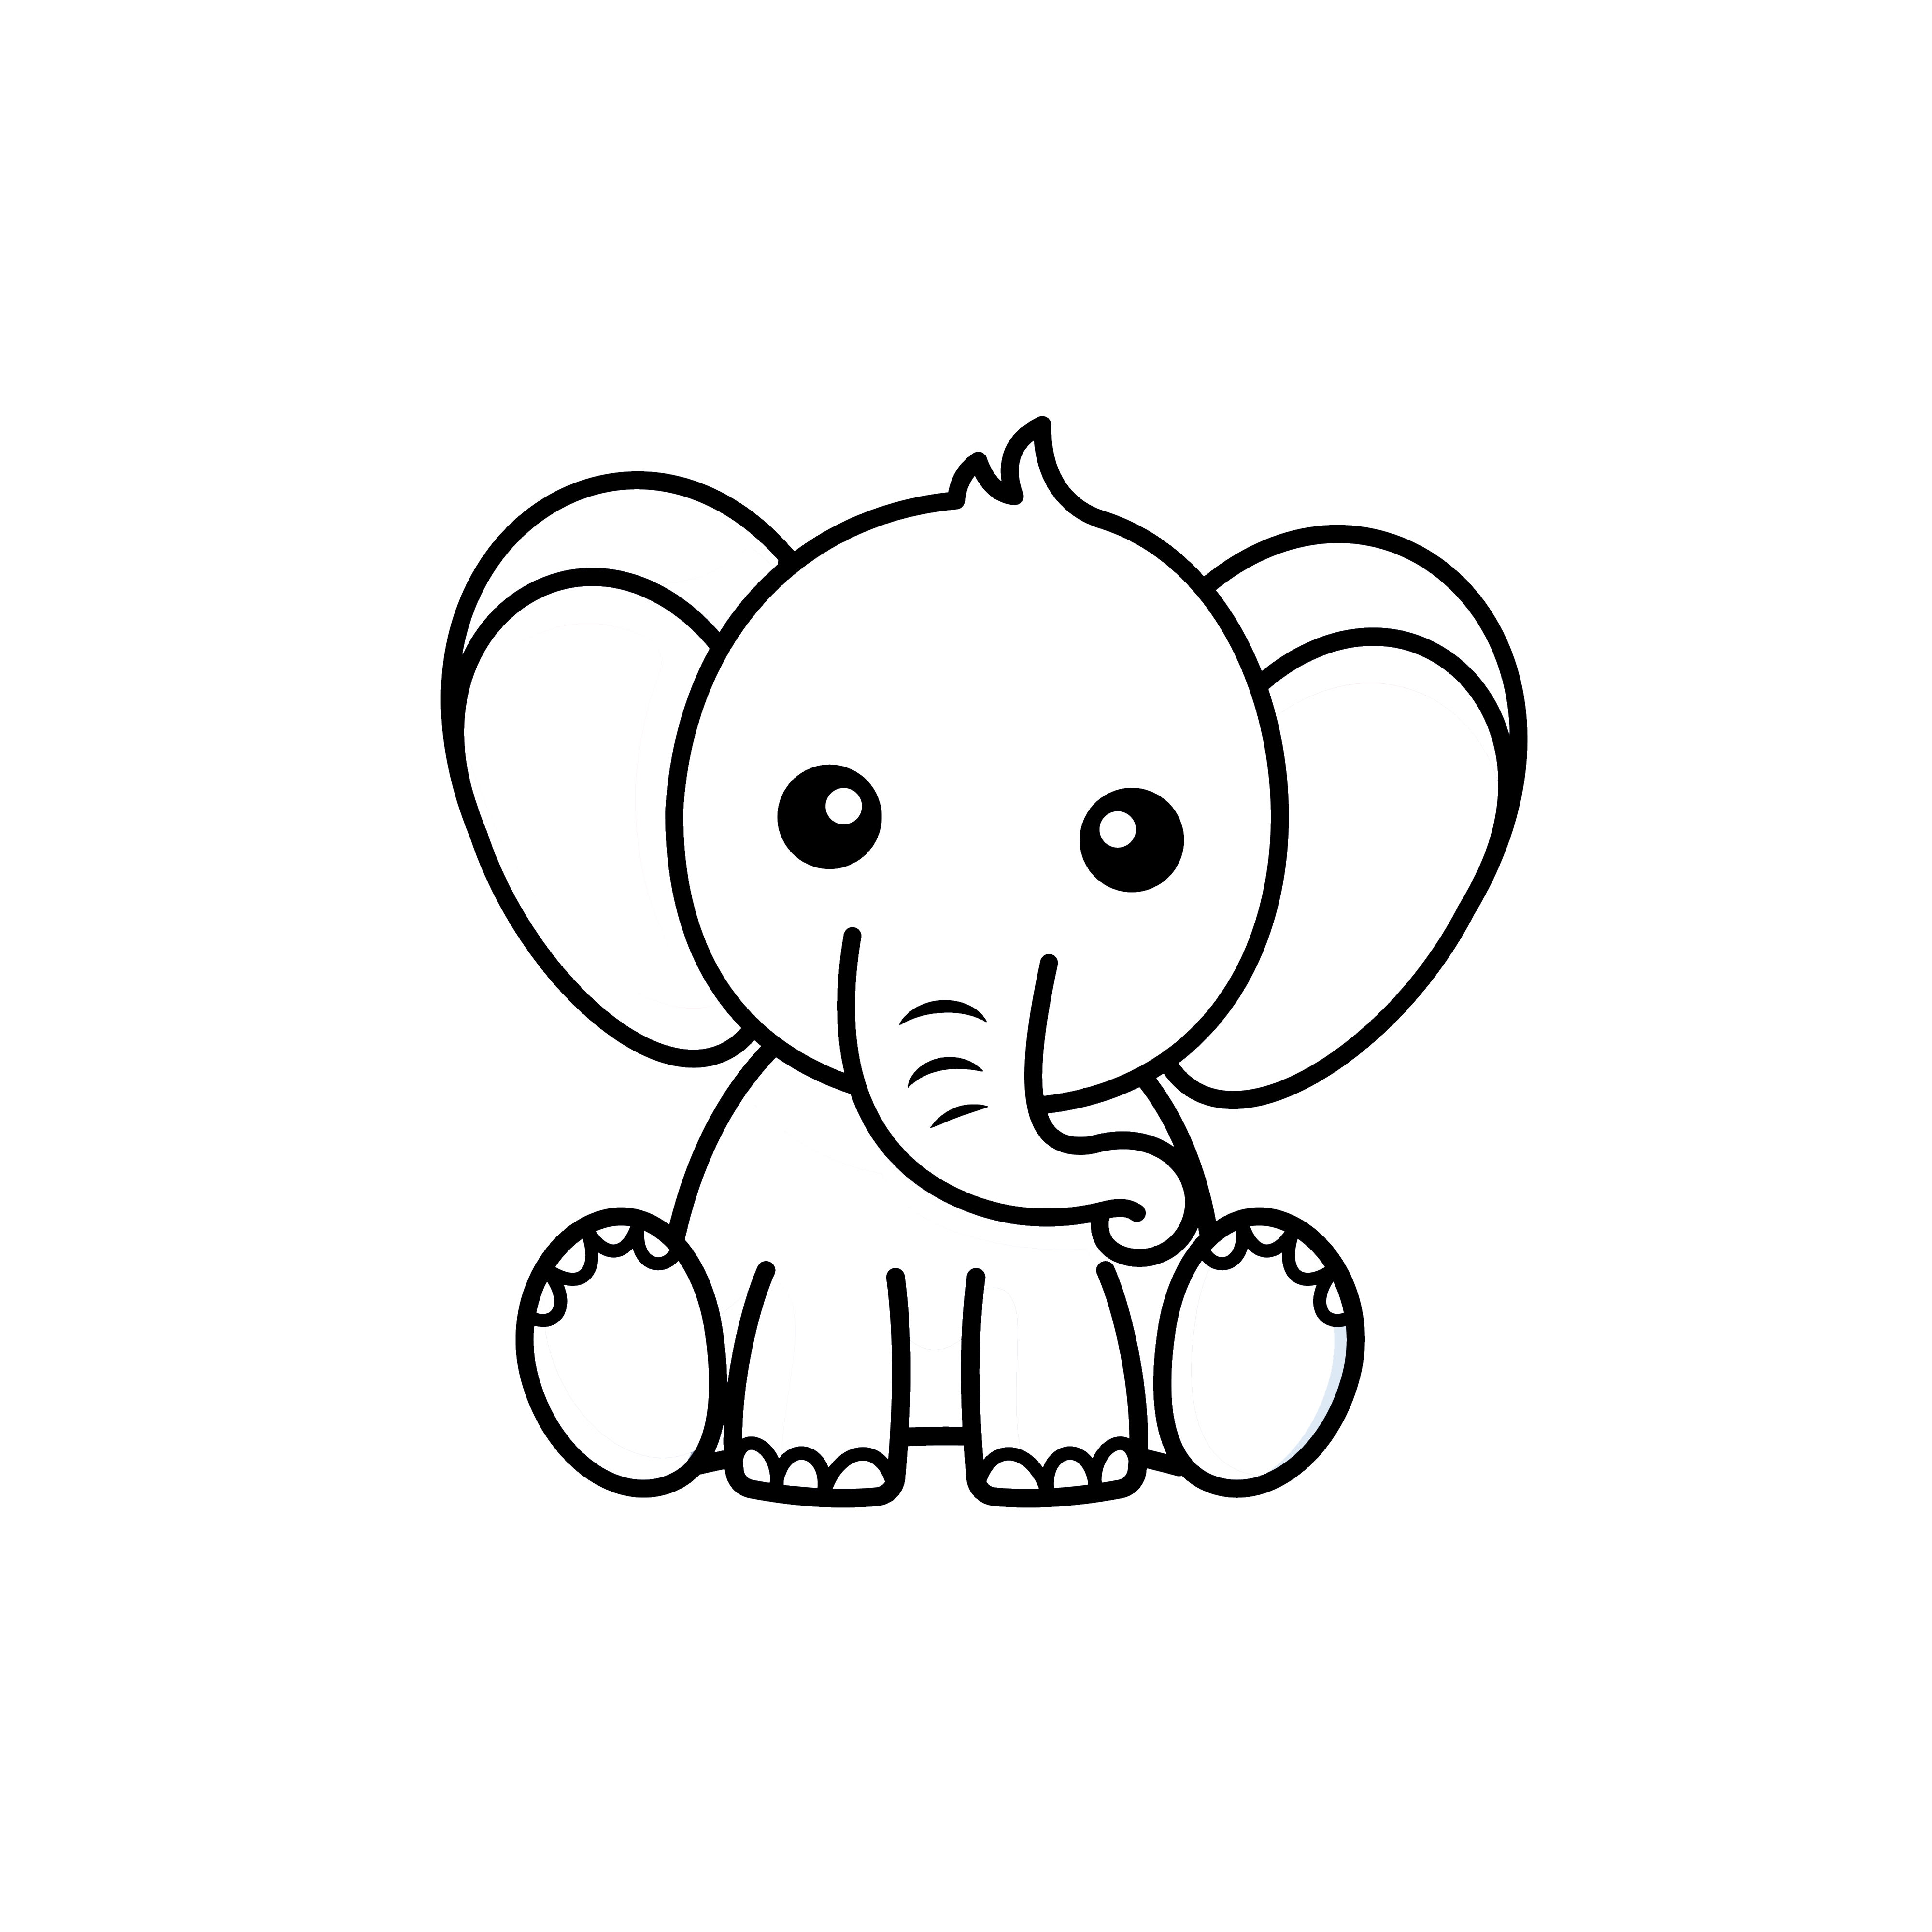 Give you access to my cute animals coloring pages by ...